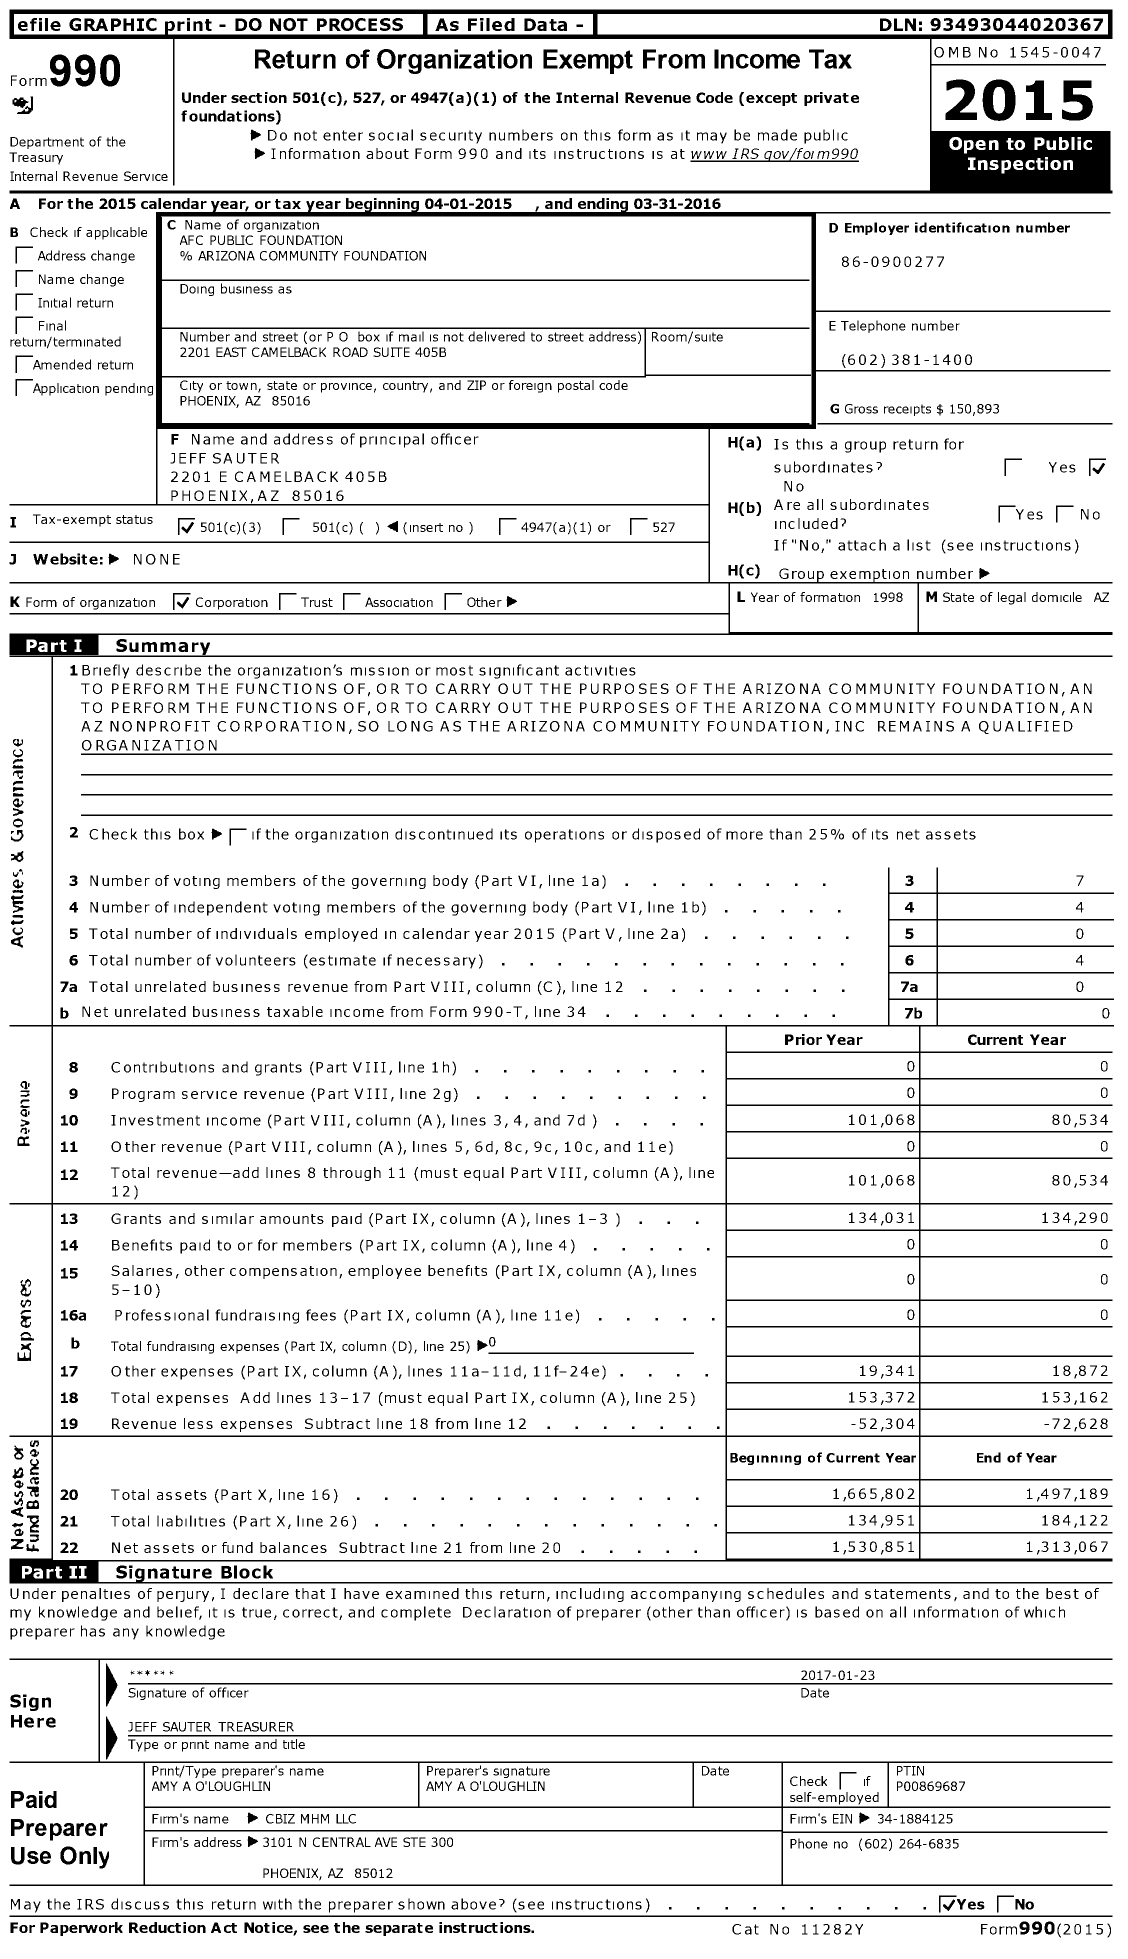 Image of first page of 2015 Form 990 for Afc Public Foundation